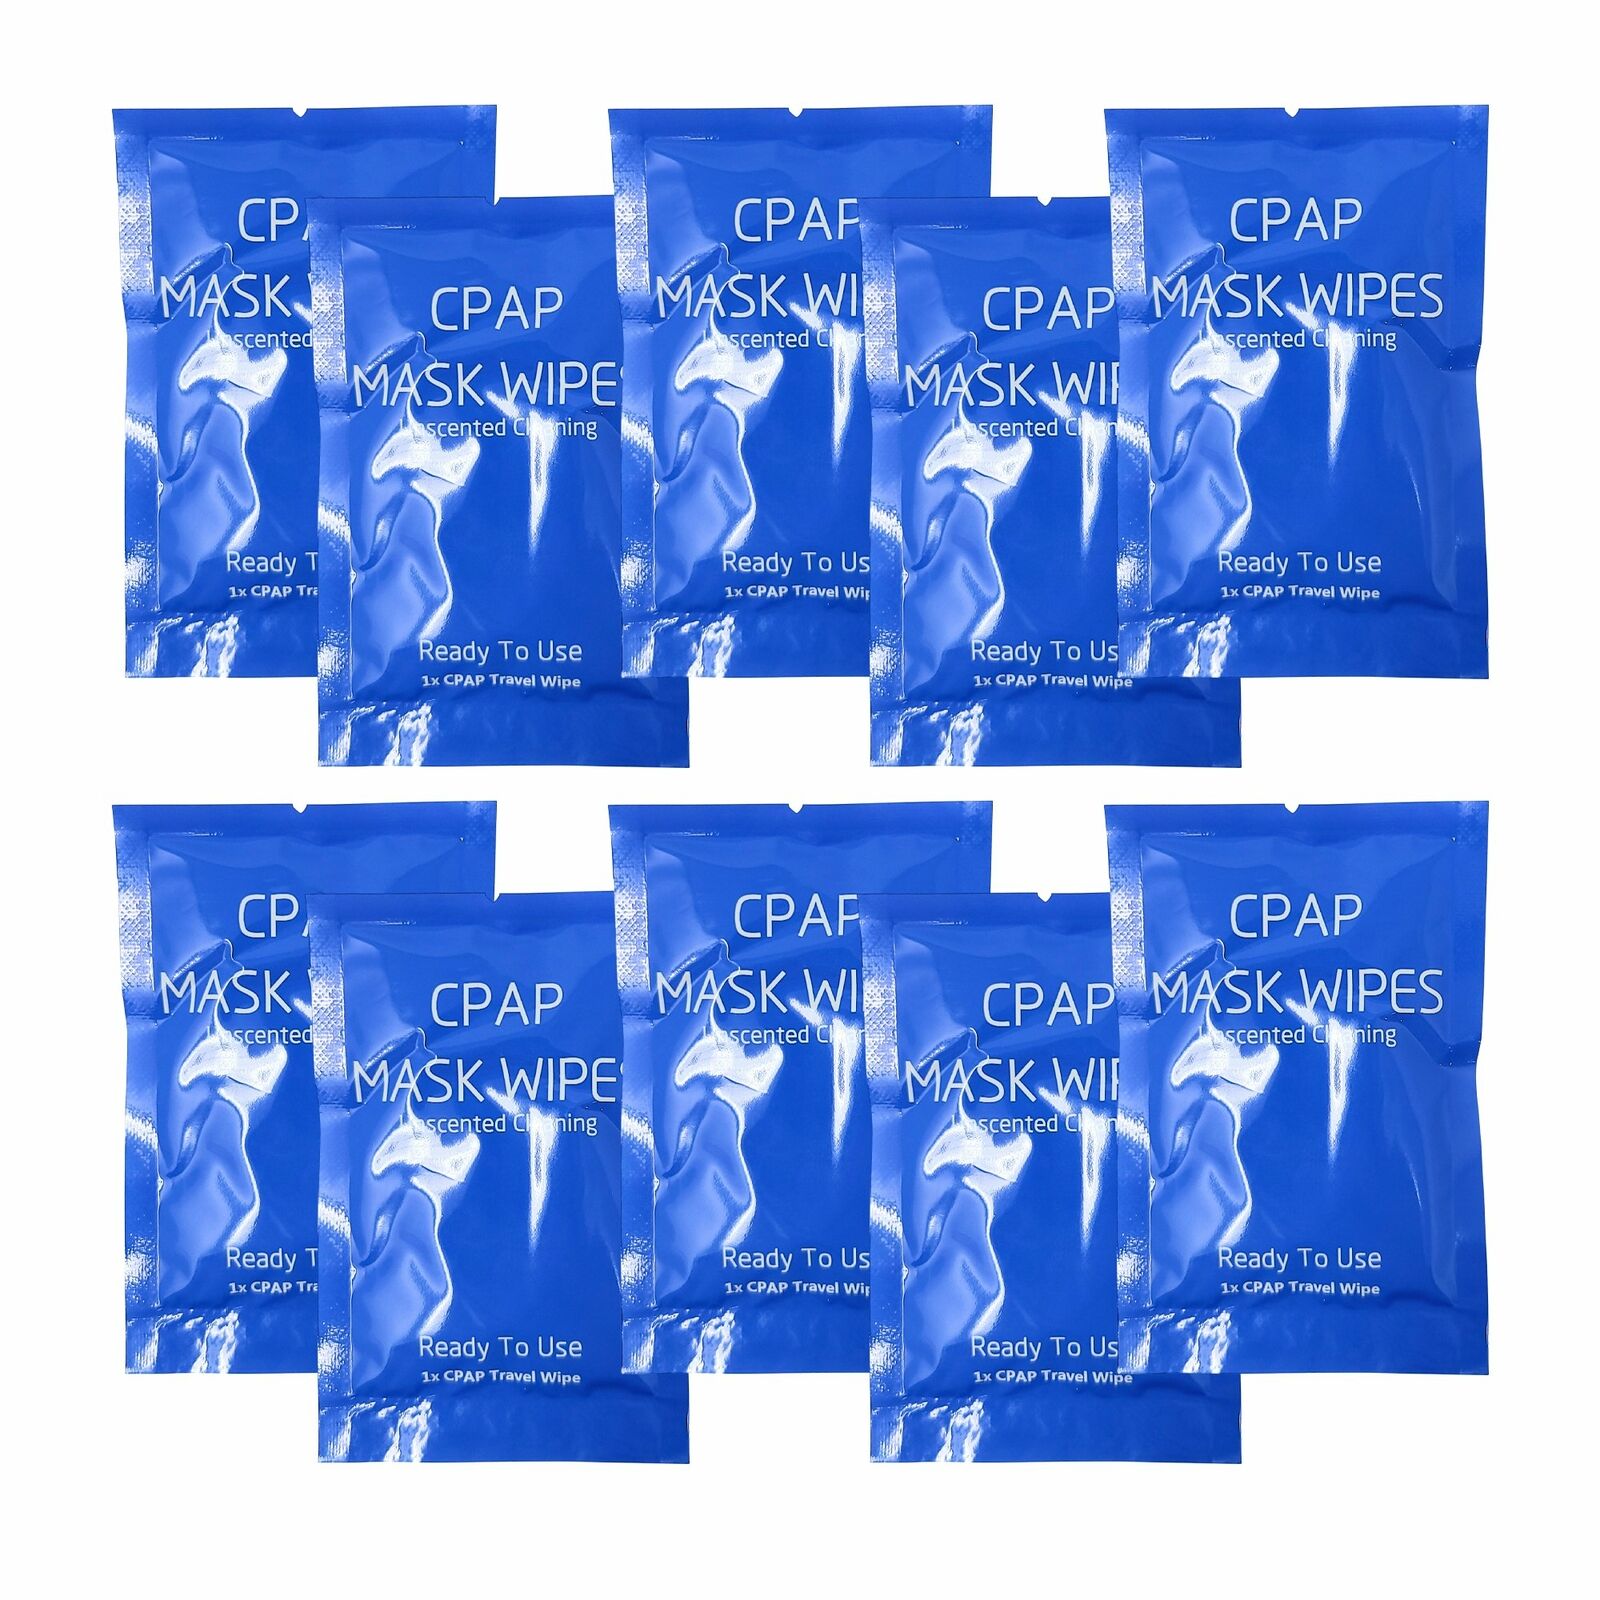 Outlet ☆ Free Shipping CPAP Cleaning Mask Wipes Travel Size Now free shipping Unscented -